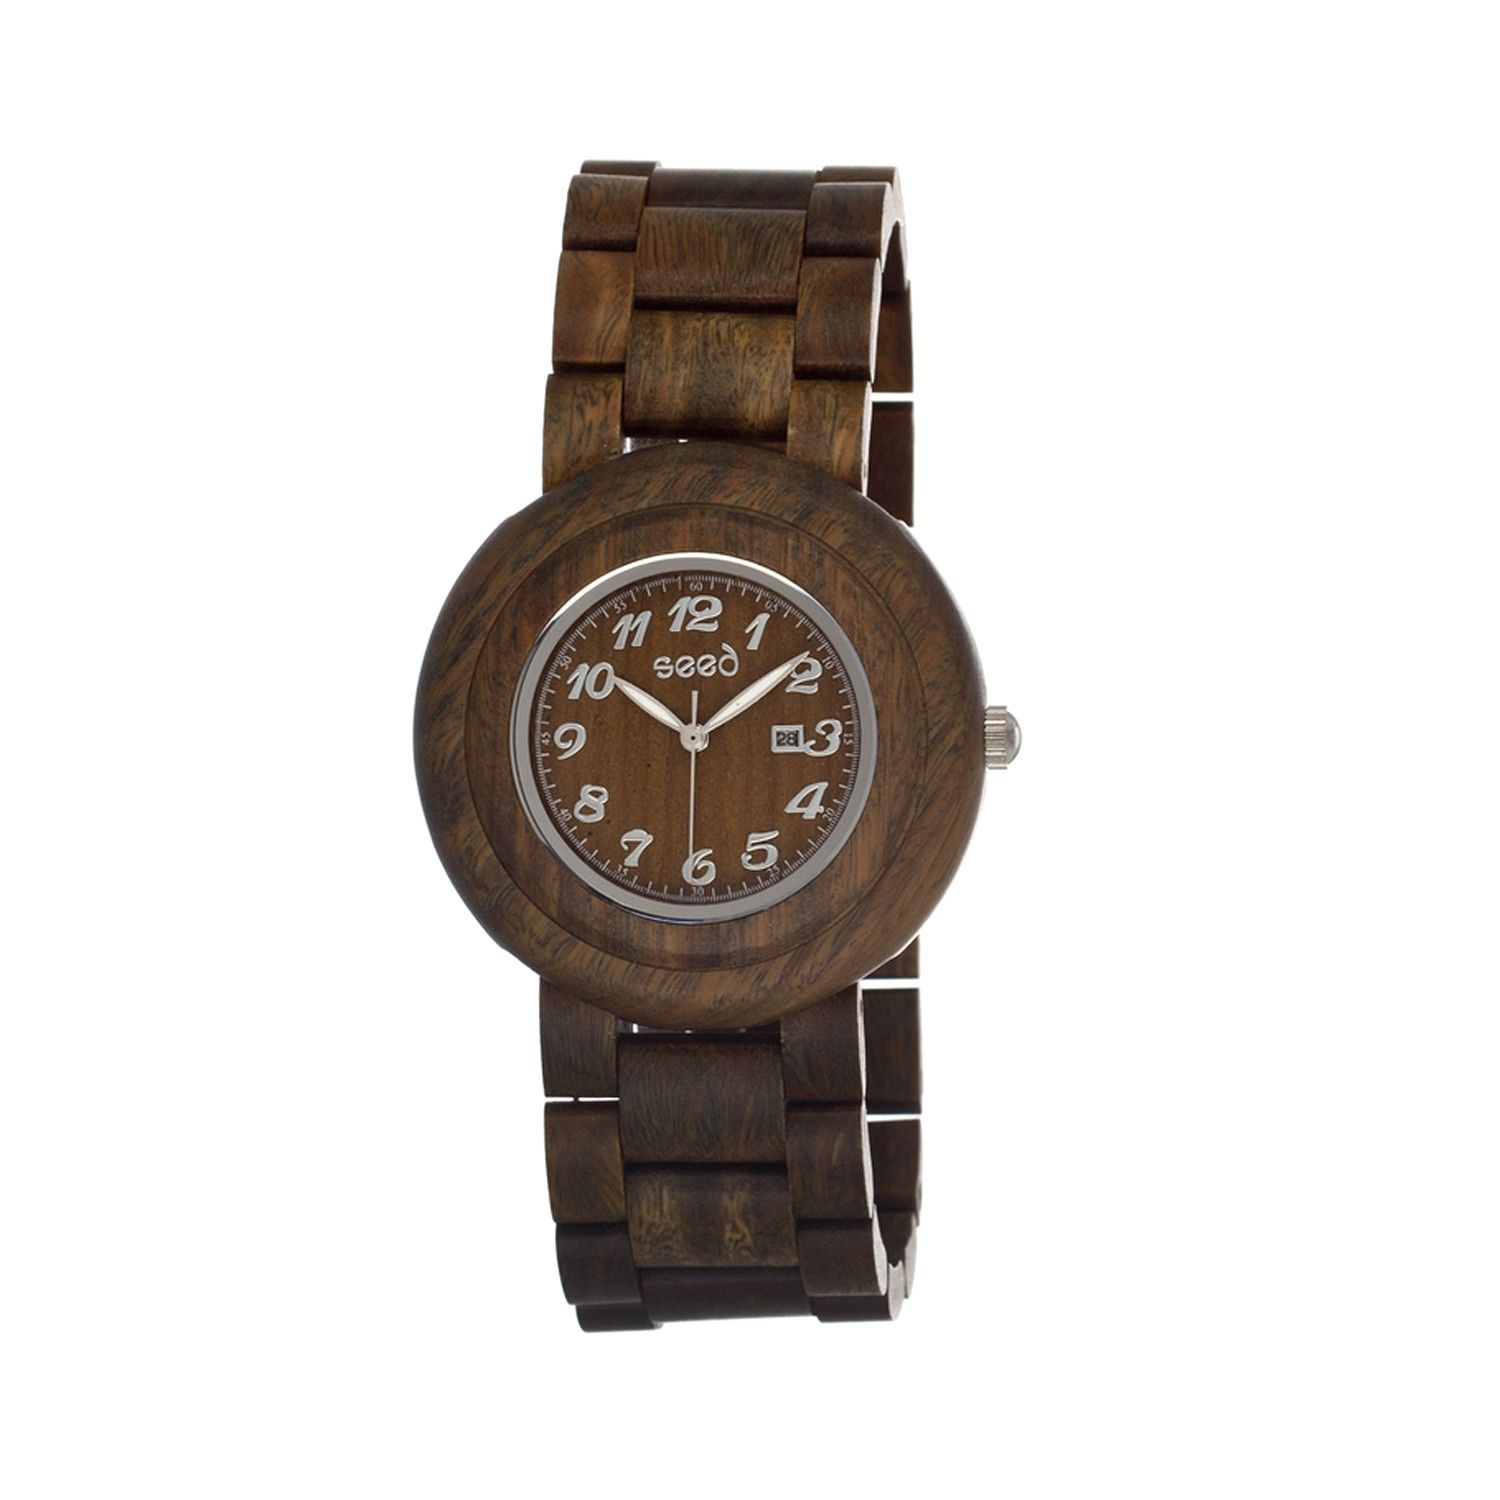 Olive Cambium Wood Watch} unisex, eco-friendly, simple stylish#Repin ...